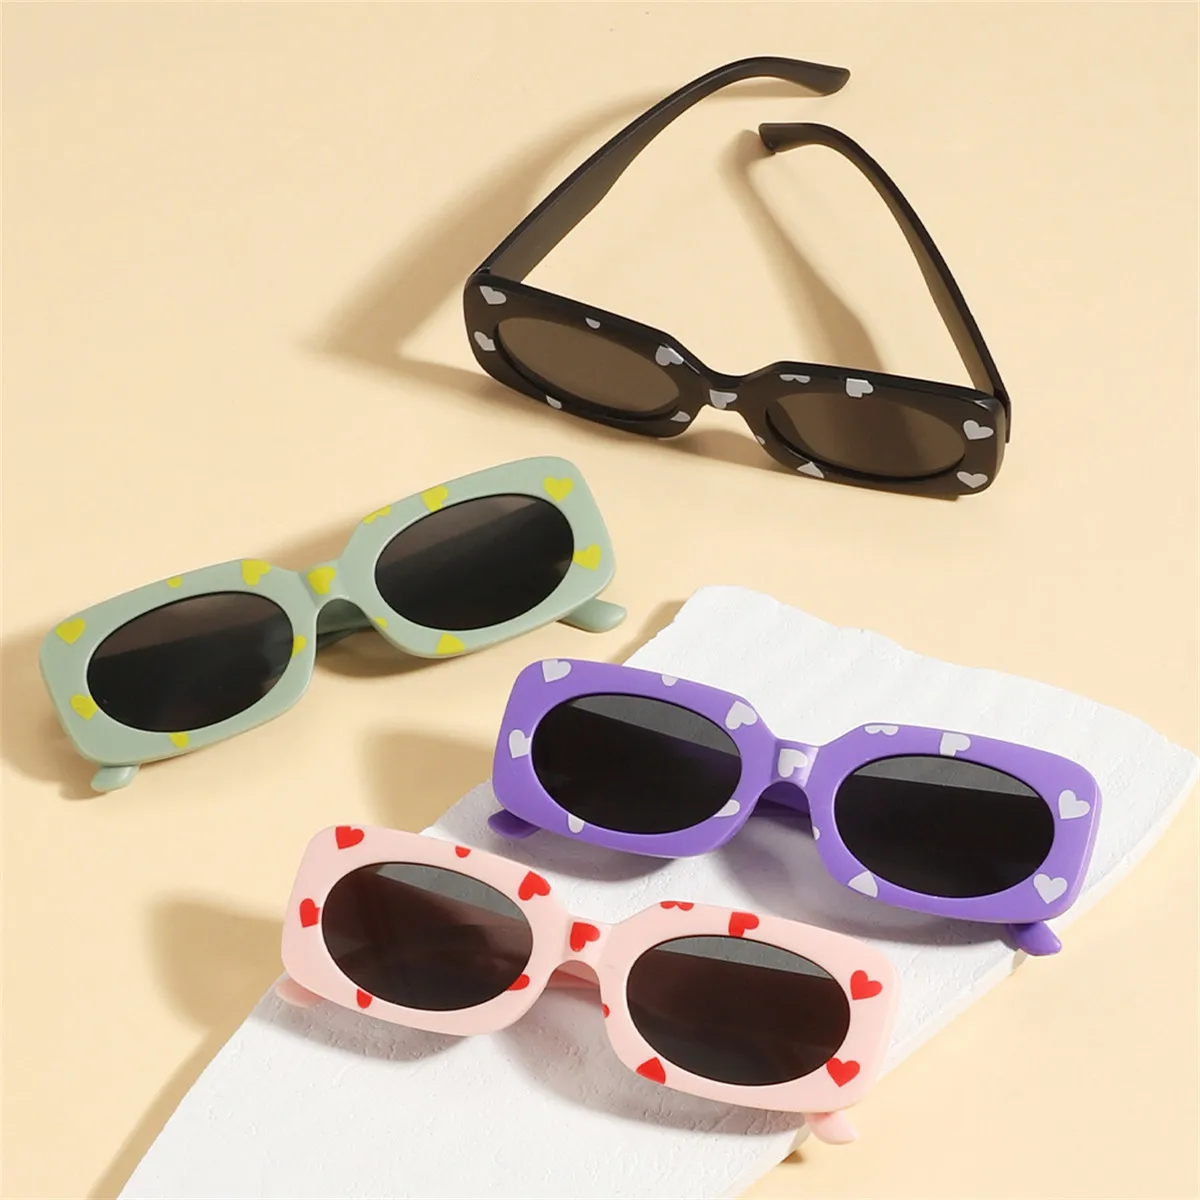 Toddler/kids likes Love sunglasses and glasses case White big image 1